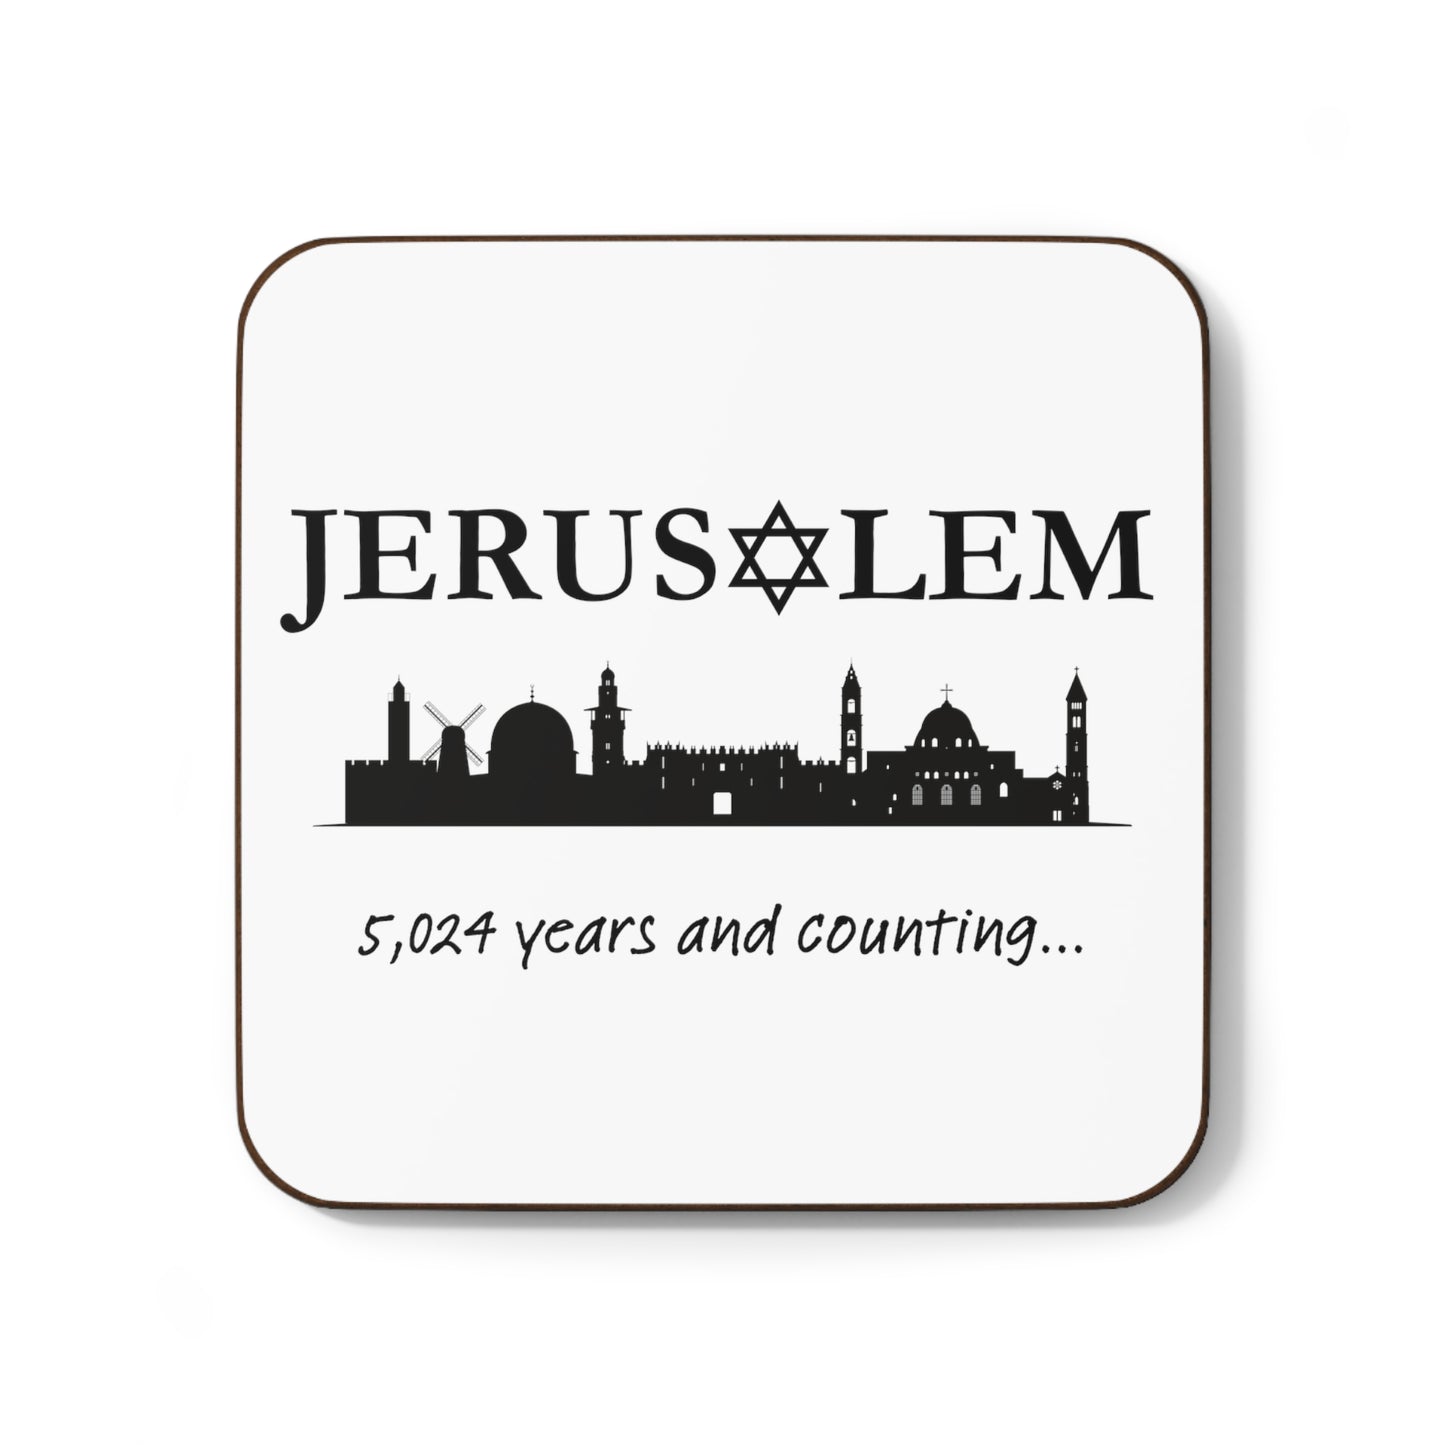 Jerusalem - 5,024 Years and Counting... Coaster